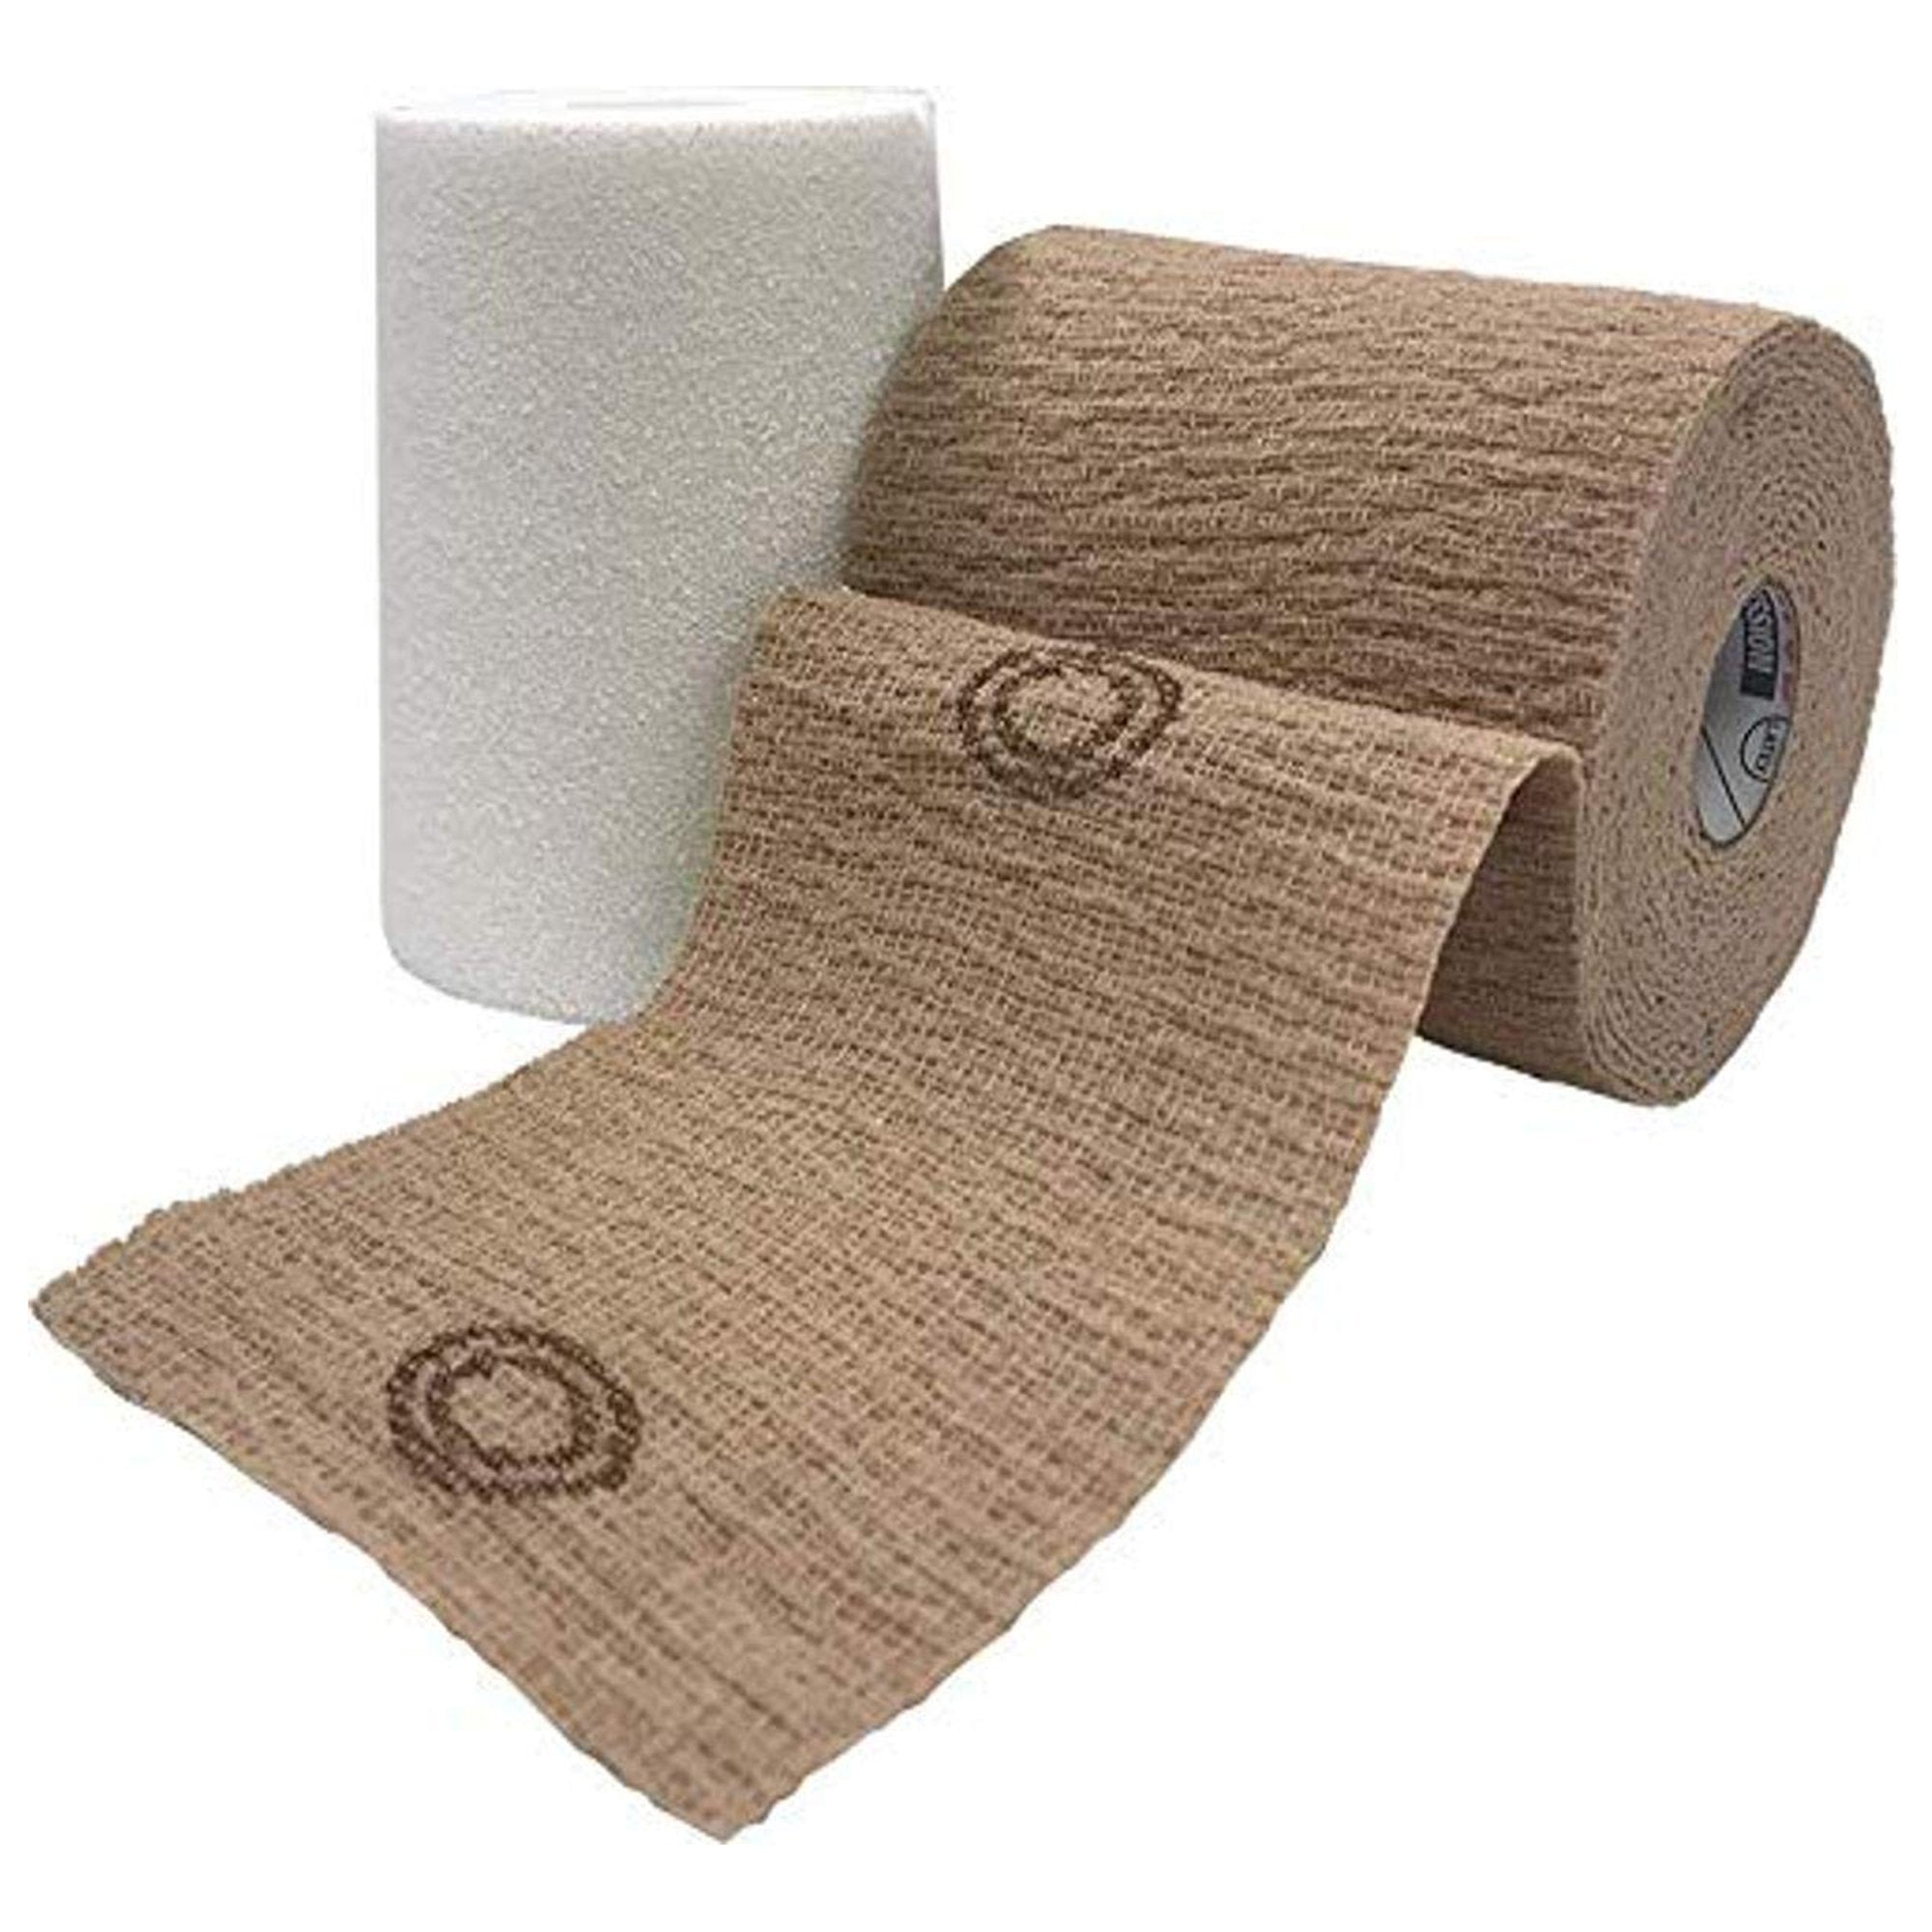 2 Layer Compression Bandage System CoFlex® TLC Zinc with Indicators 4 Inch X 6 Yard / 4 Inch X 7 Yard Self-Adherent / Pull On Closure Tan NonSterile 35 to 40 mmHg